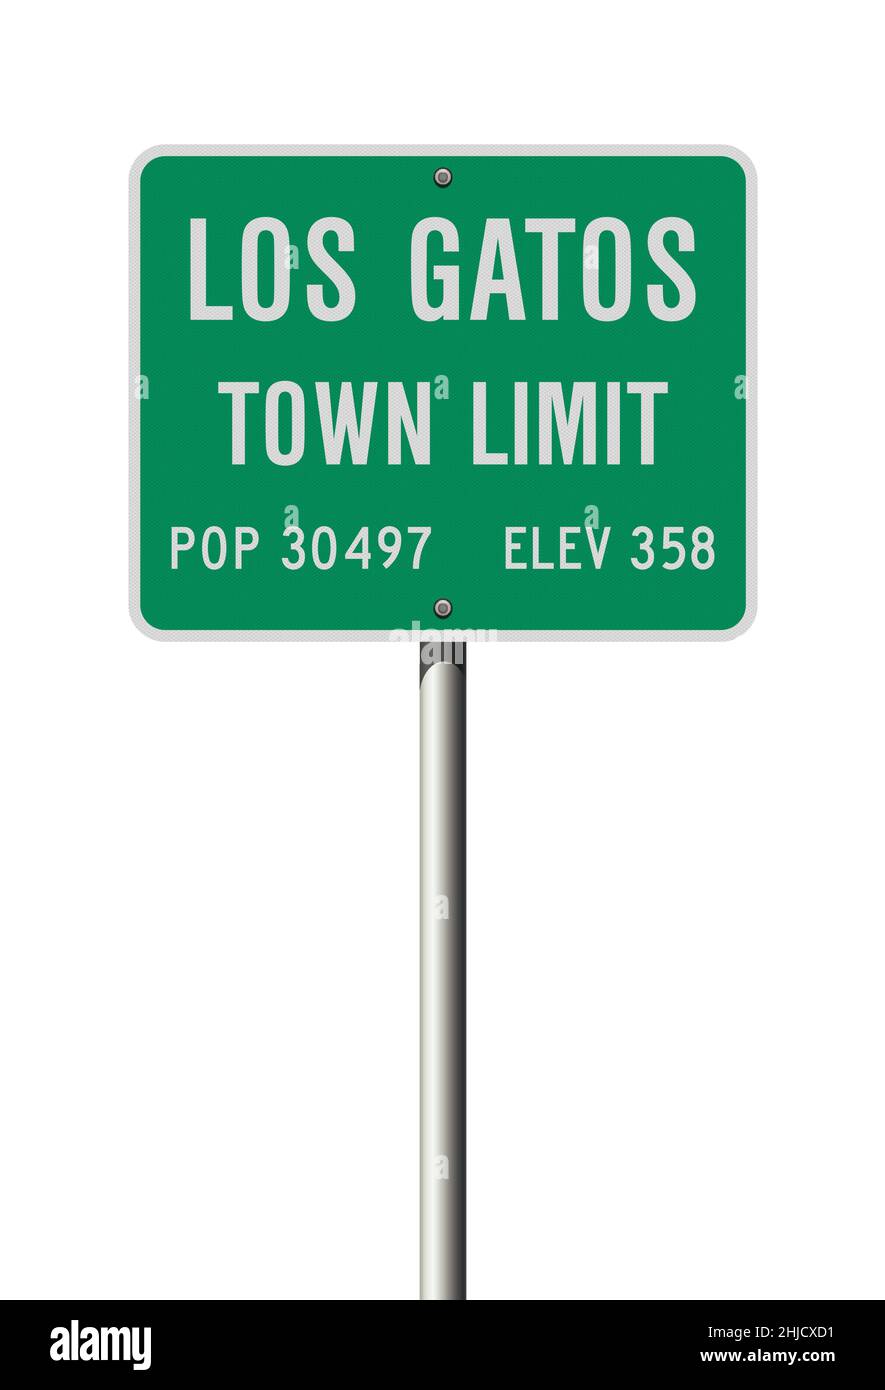 Vector illustration of the Los Gatos Town Limit green road sign on metallic post Stock Vector